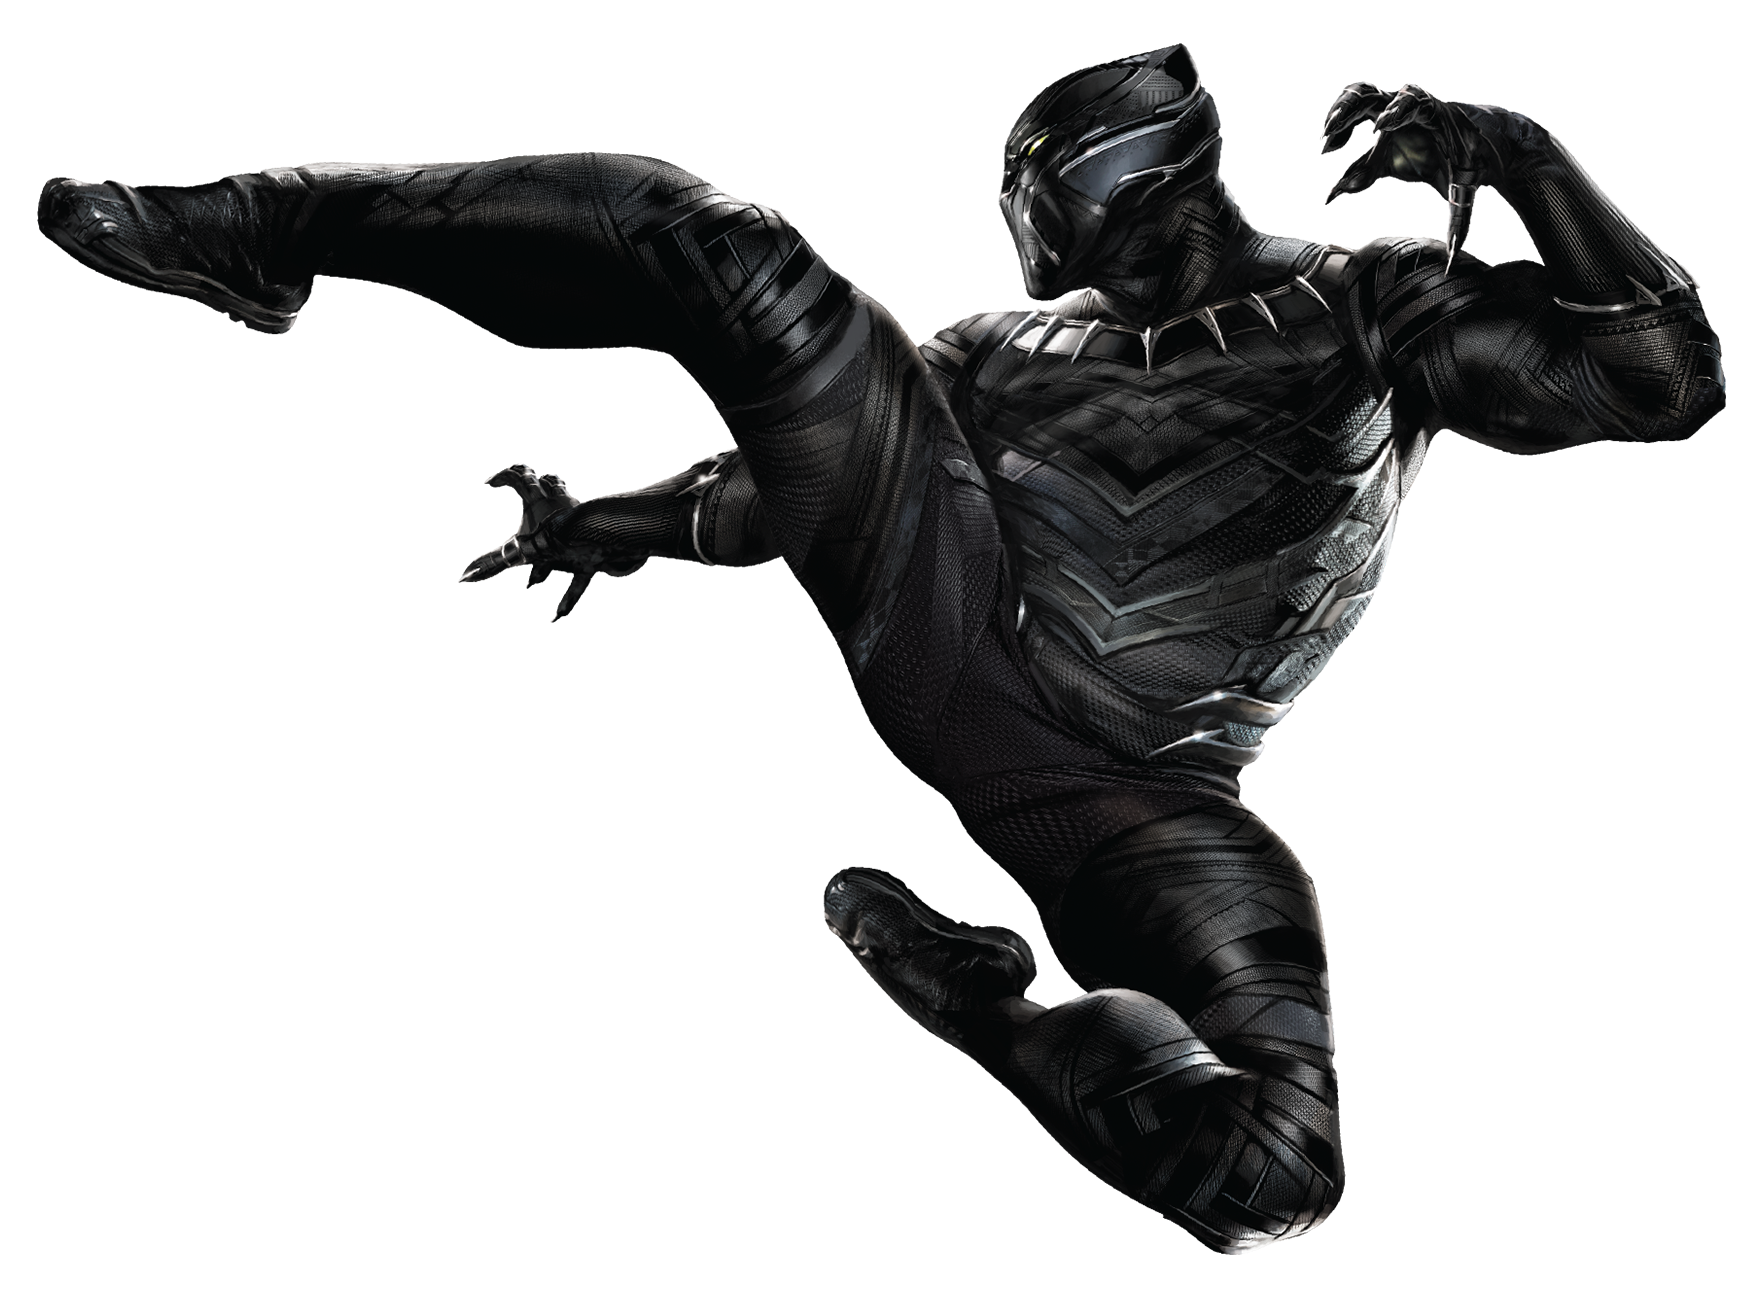 Black Panther Png - Image   Cw Panther Kick Render.png | Marvel Cinematic Universe Wiki | Fandom Powered By Wikia, Transparent background PNG HD thumbnail